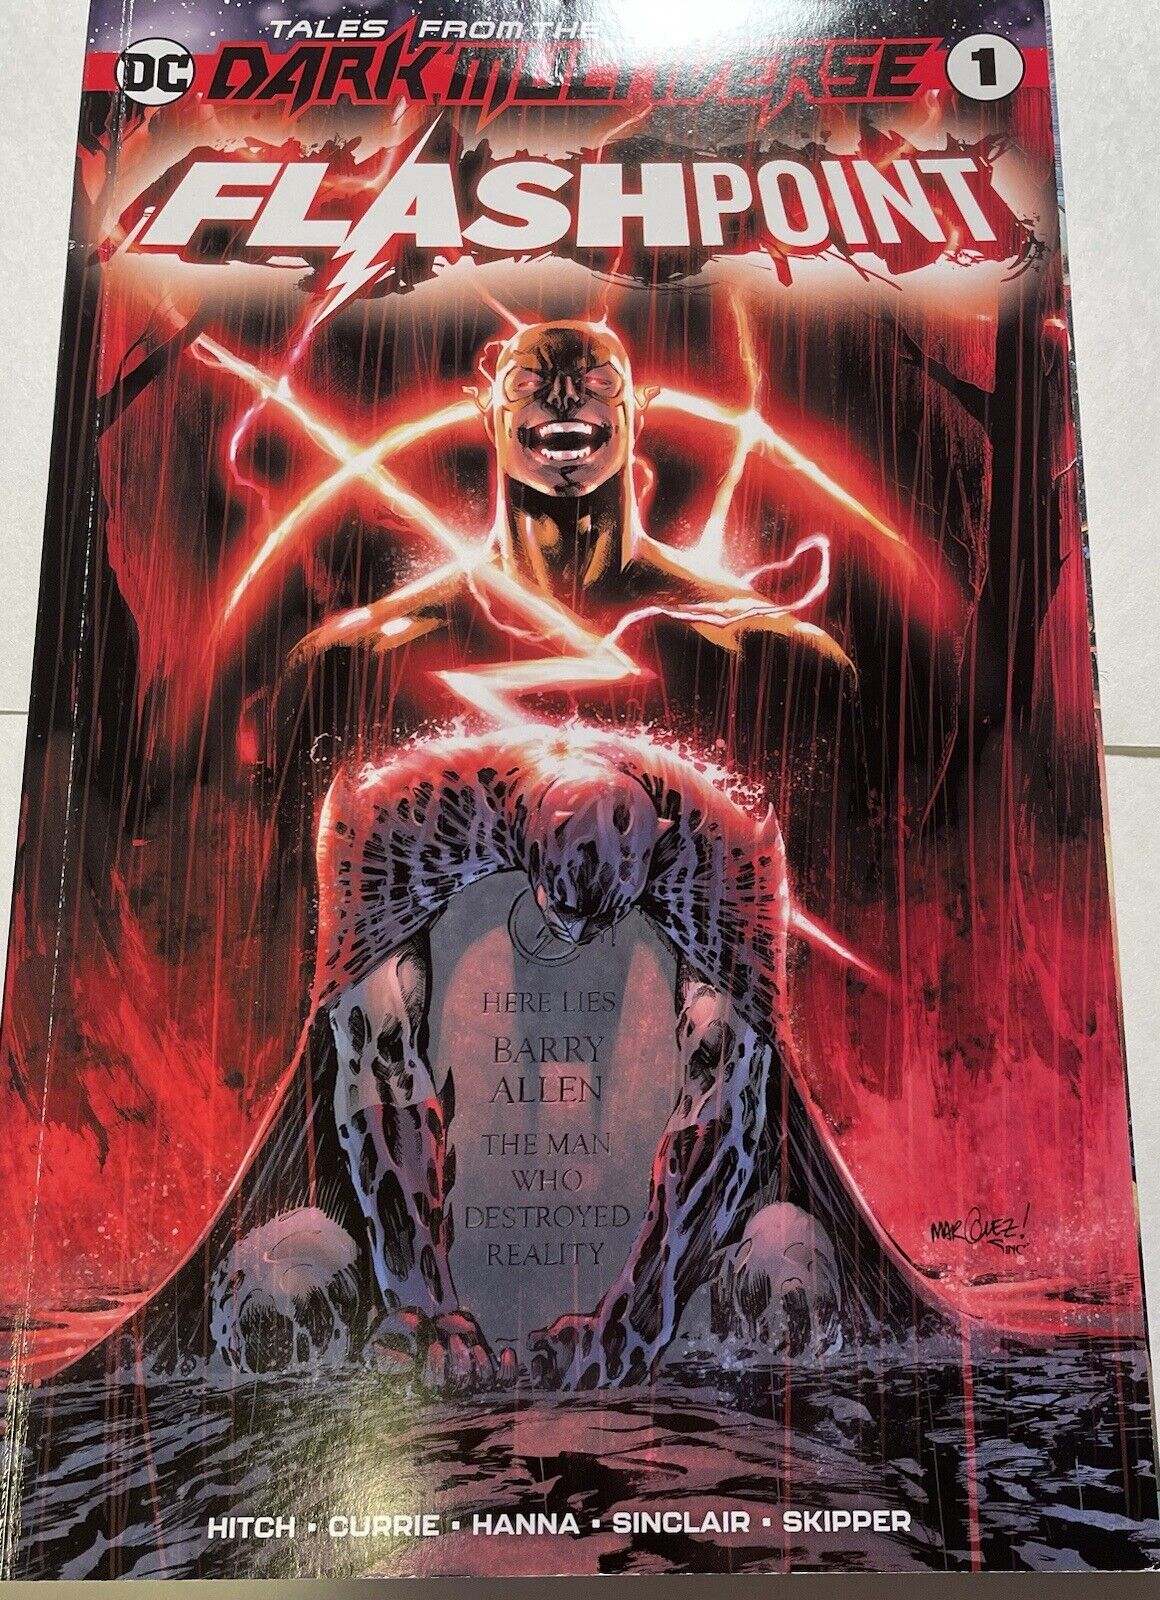 Tales from the Dark Multiverse: Flashpoint #1 (DC Comics, February 2021)